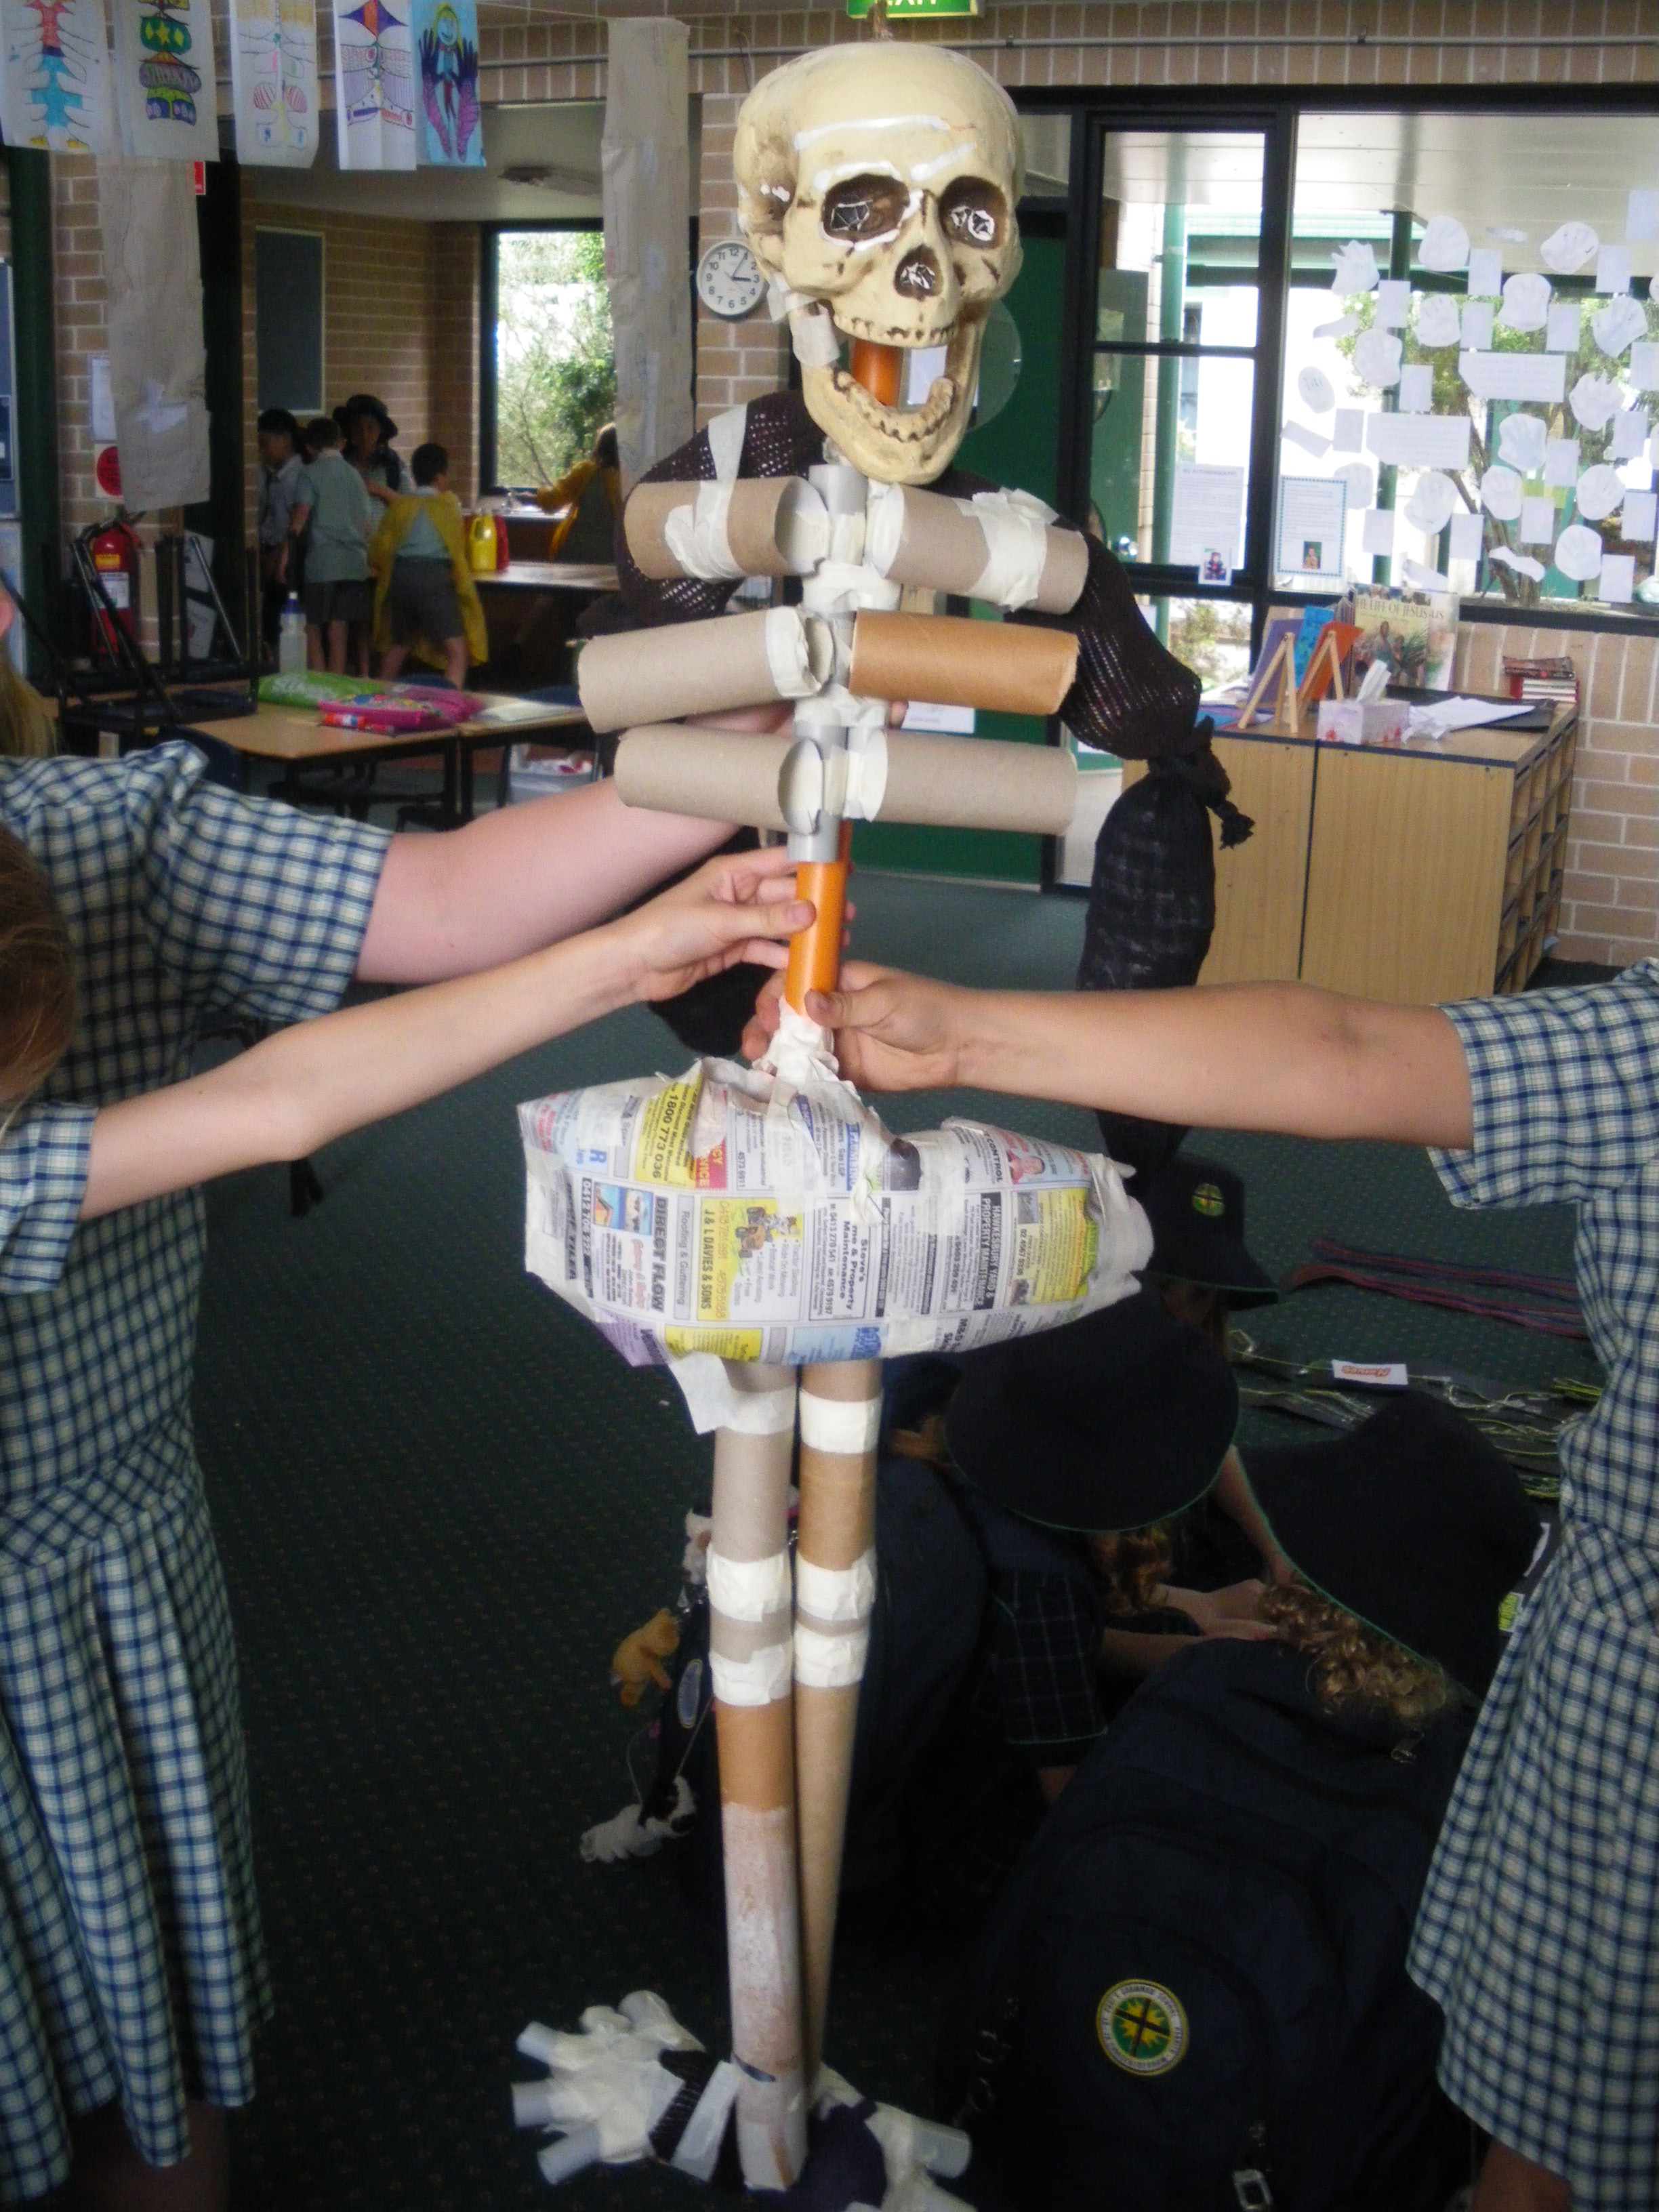 Our Body Systems Models